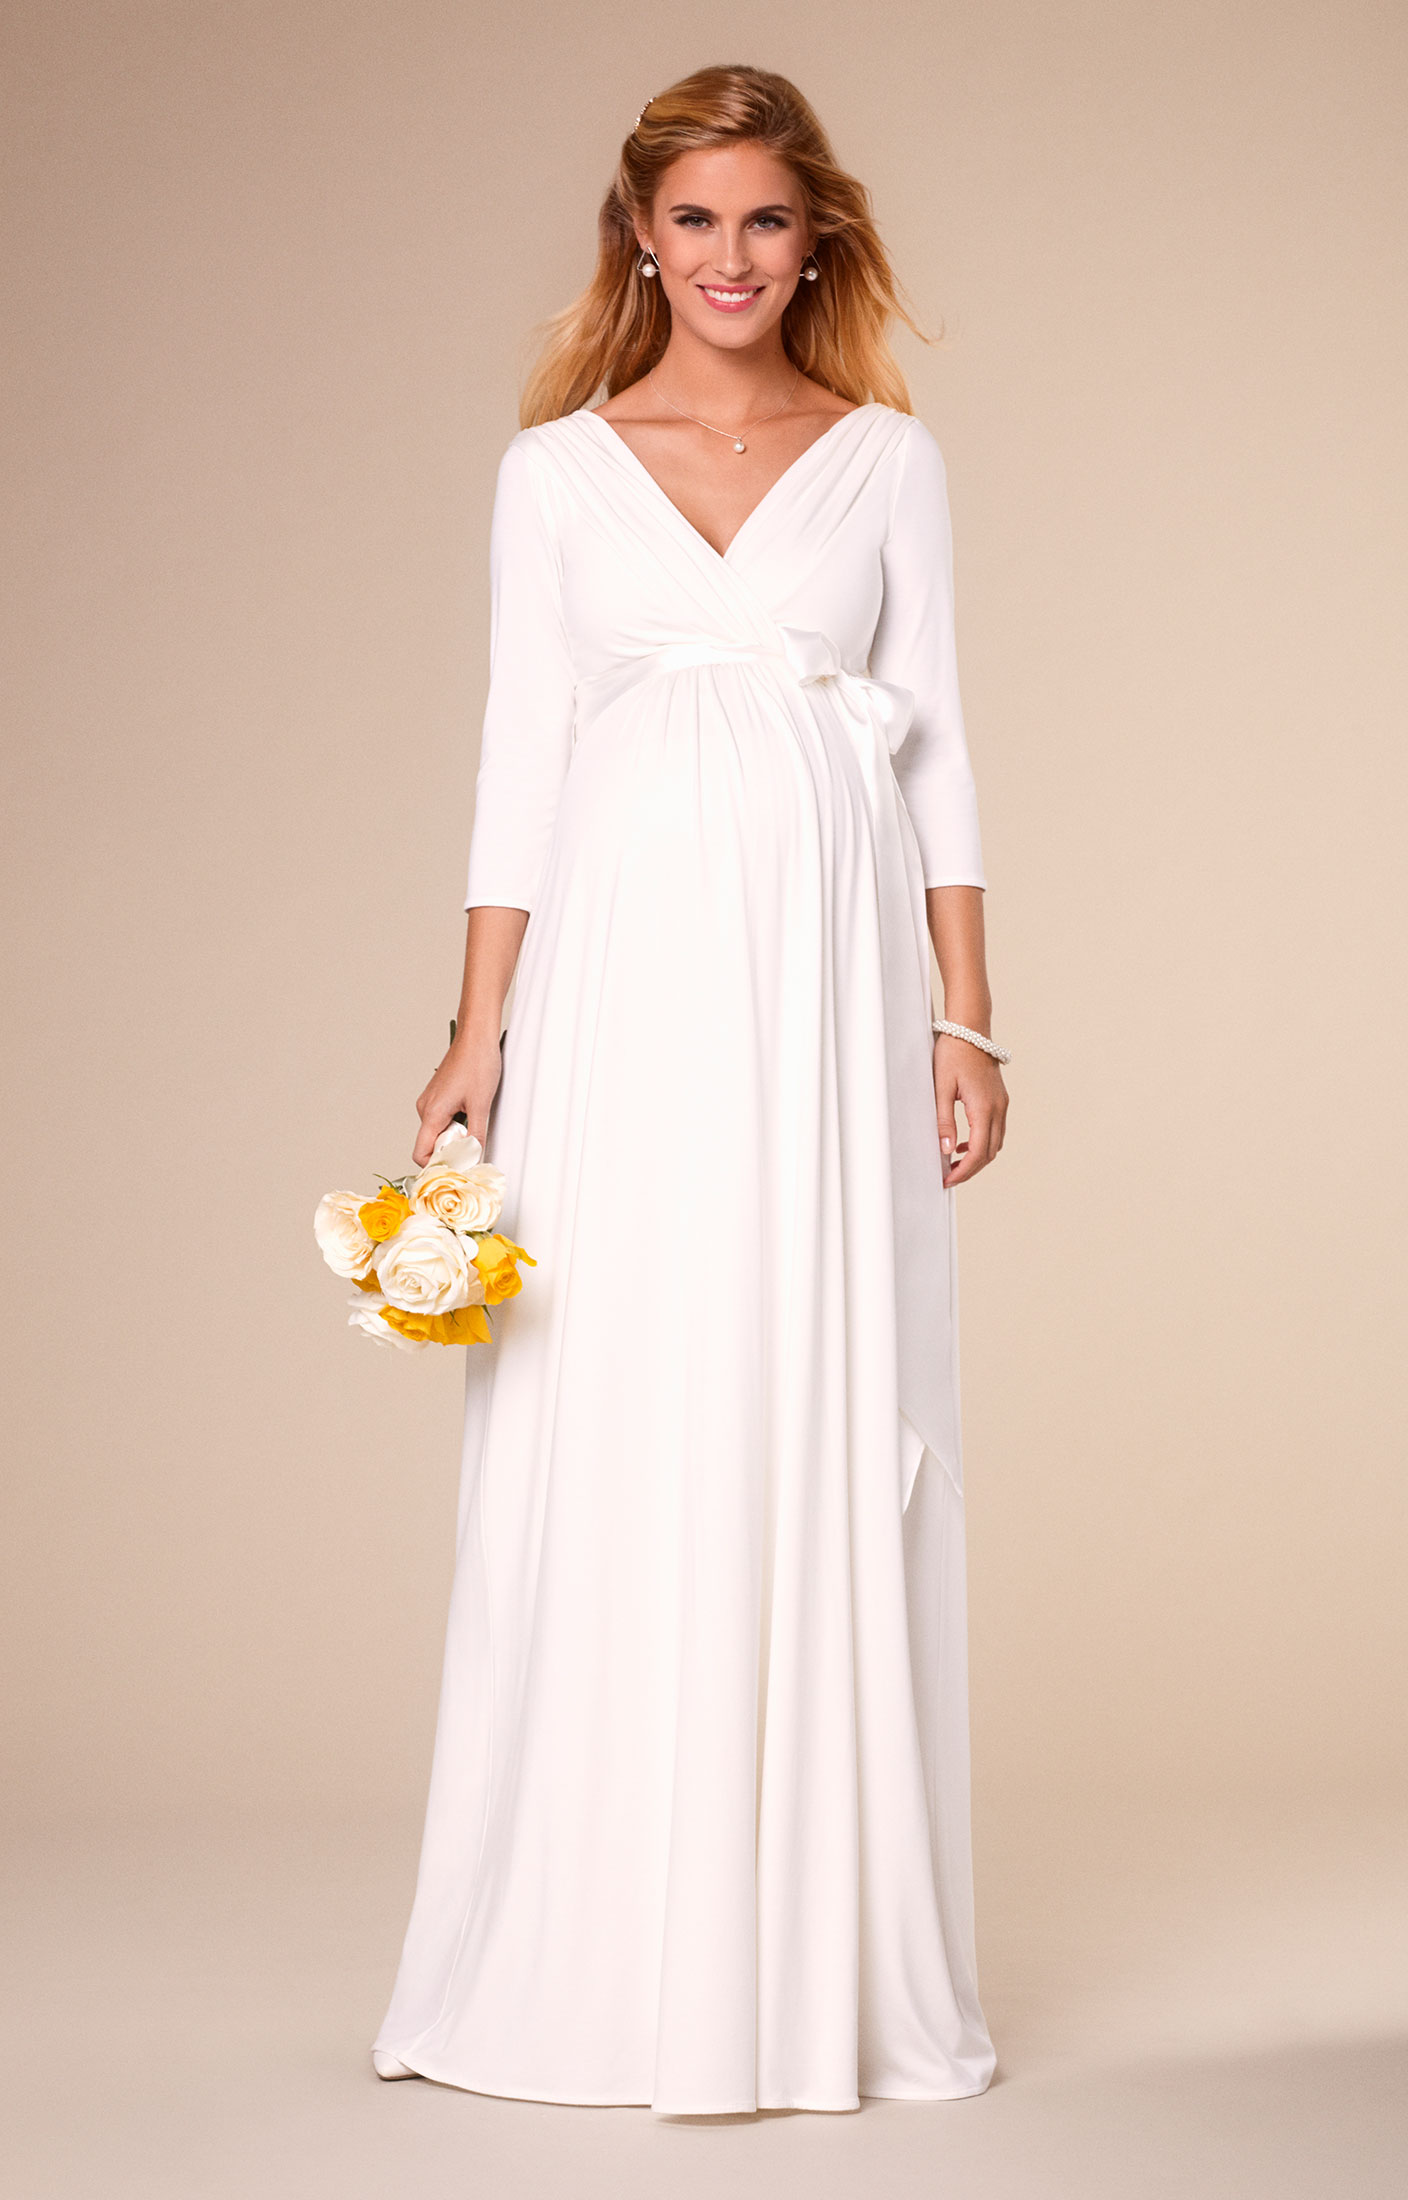 Best Simple Wedding Dresses For Pregnant Women in the world The ...